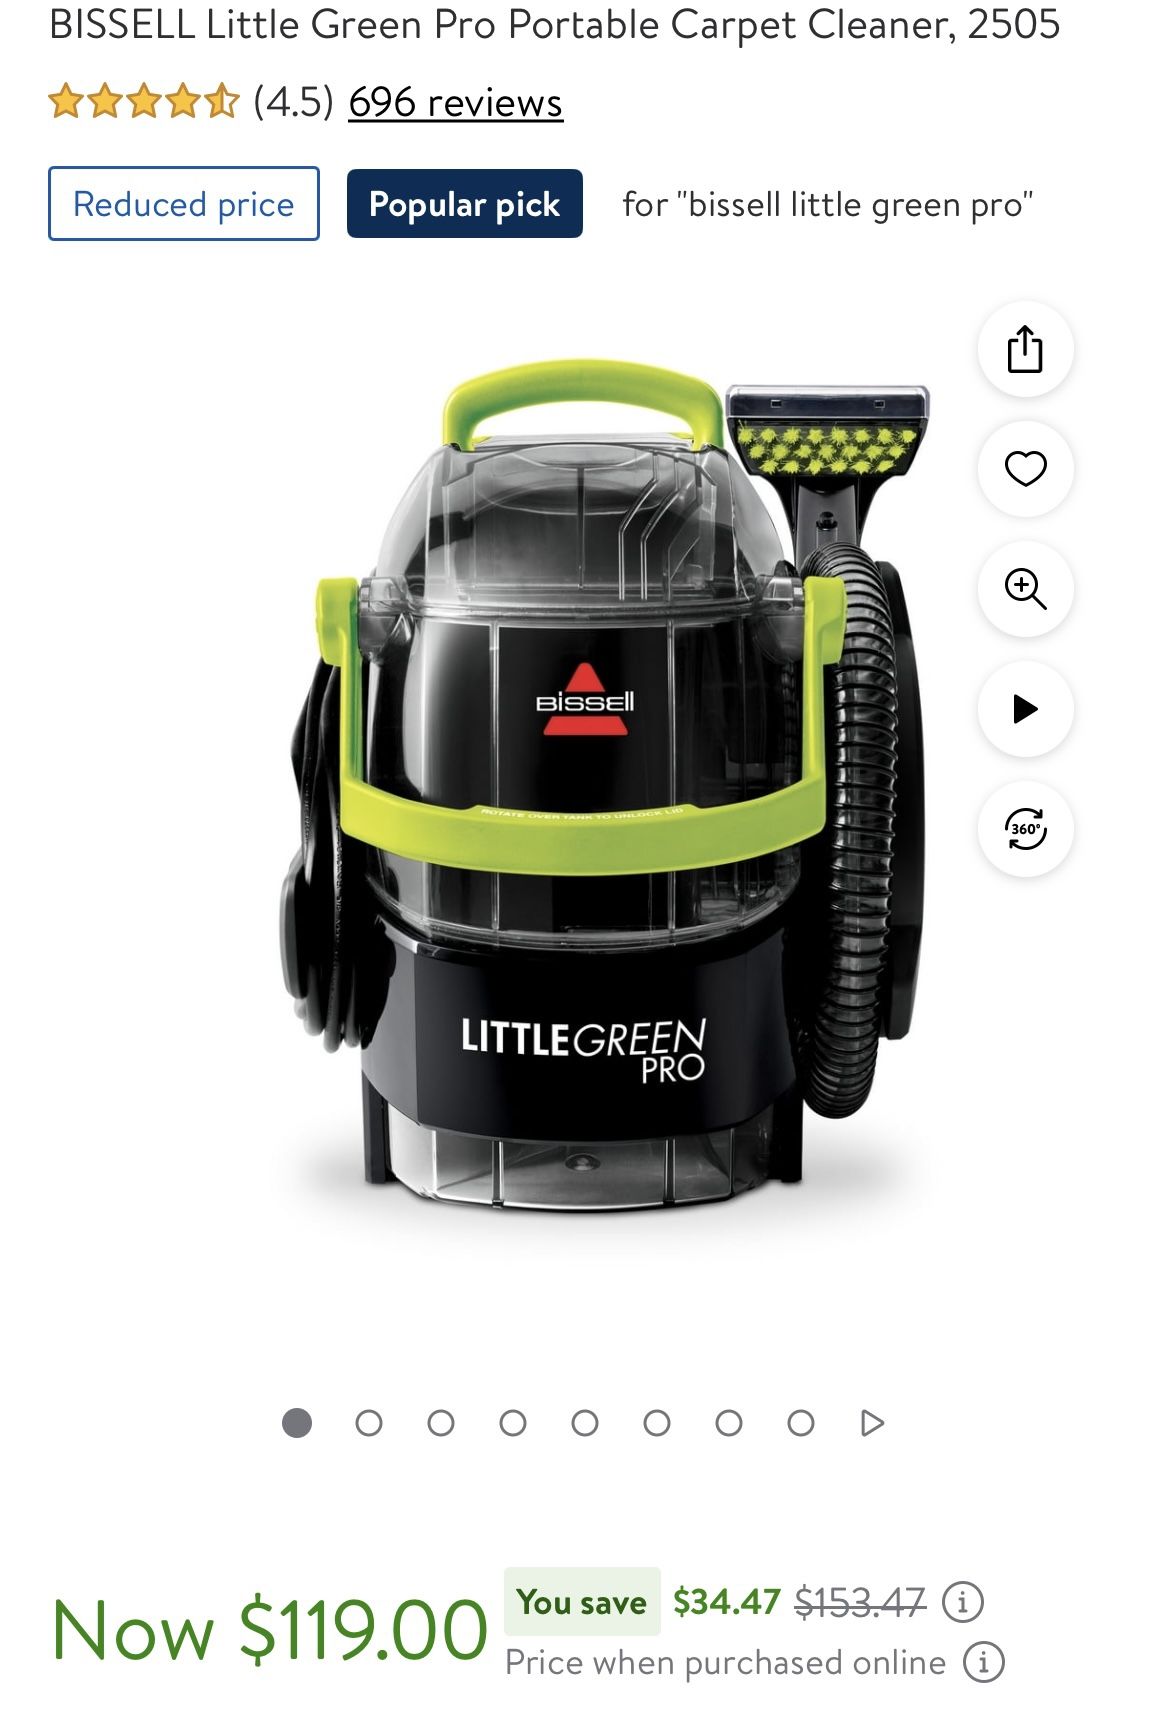 BISSELL Little Green Pro Portable Carpet Cleaner, 2505 - NEW